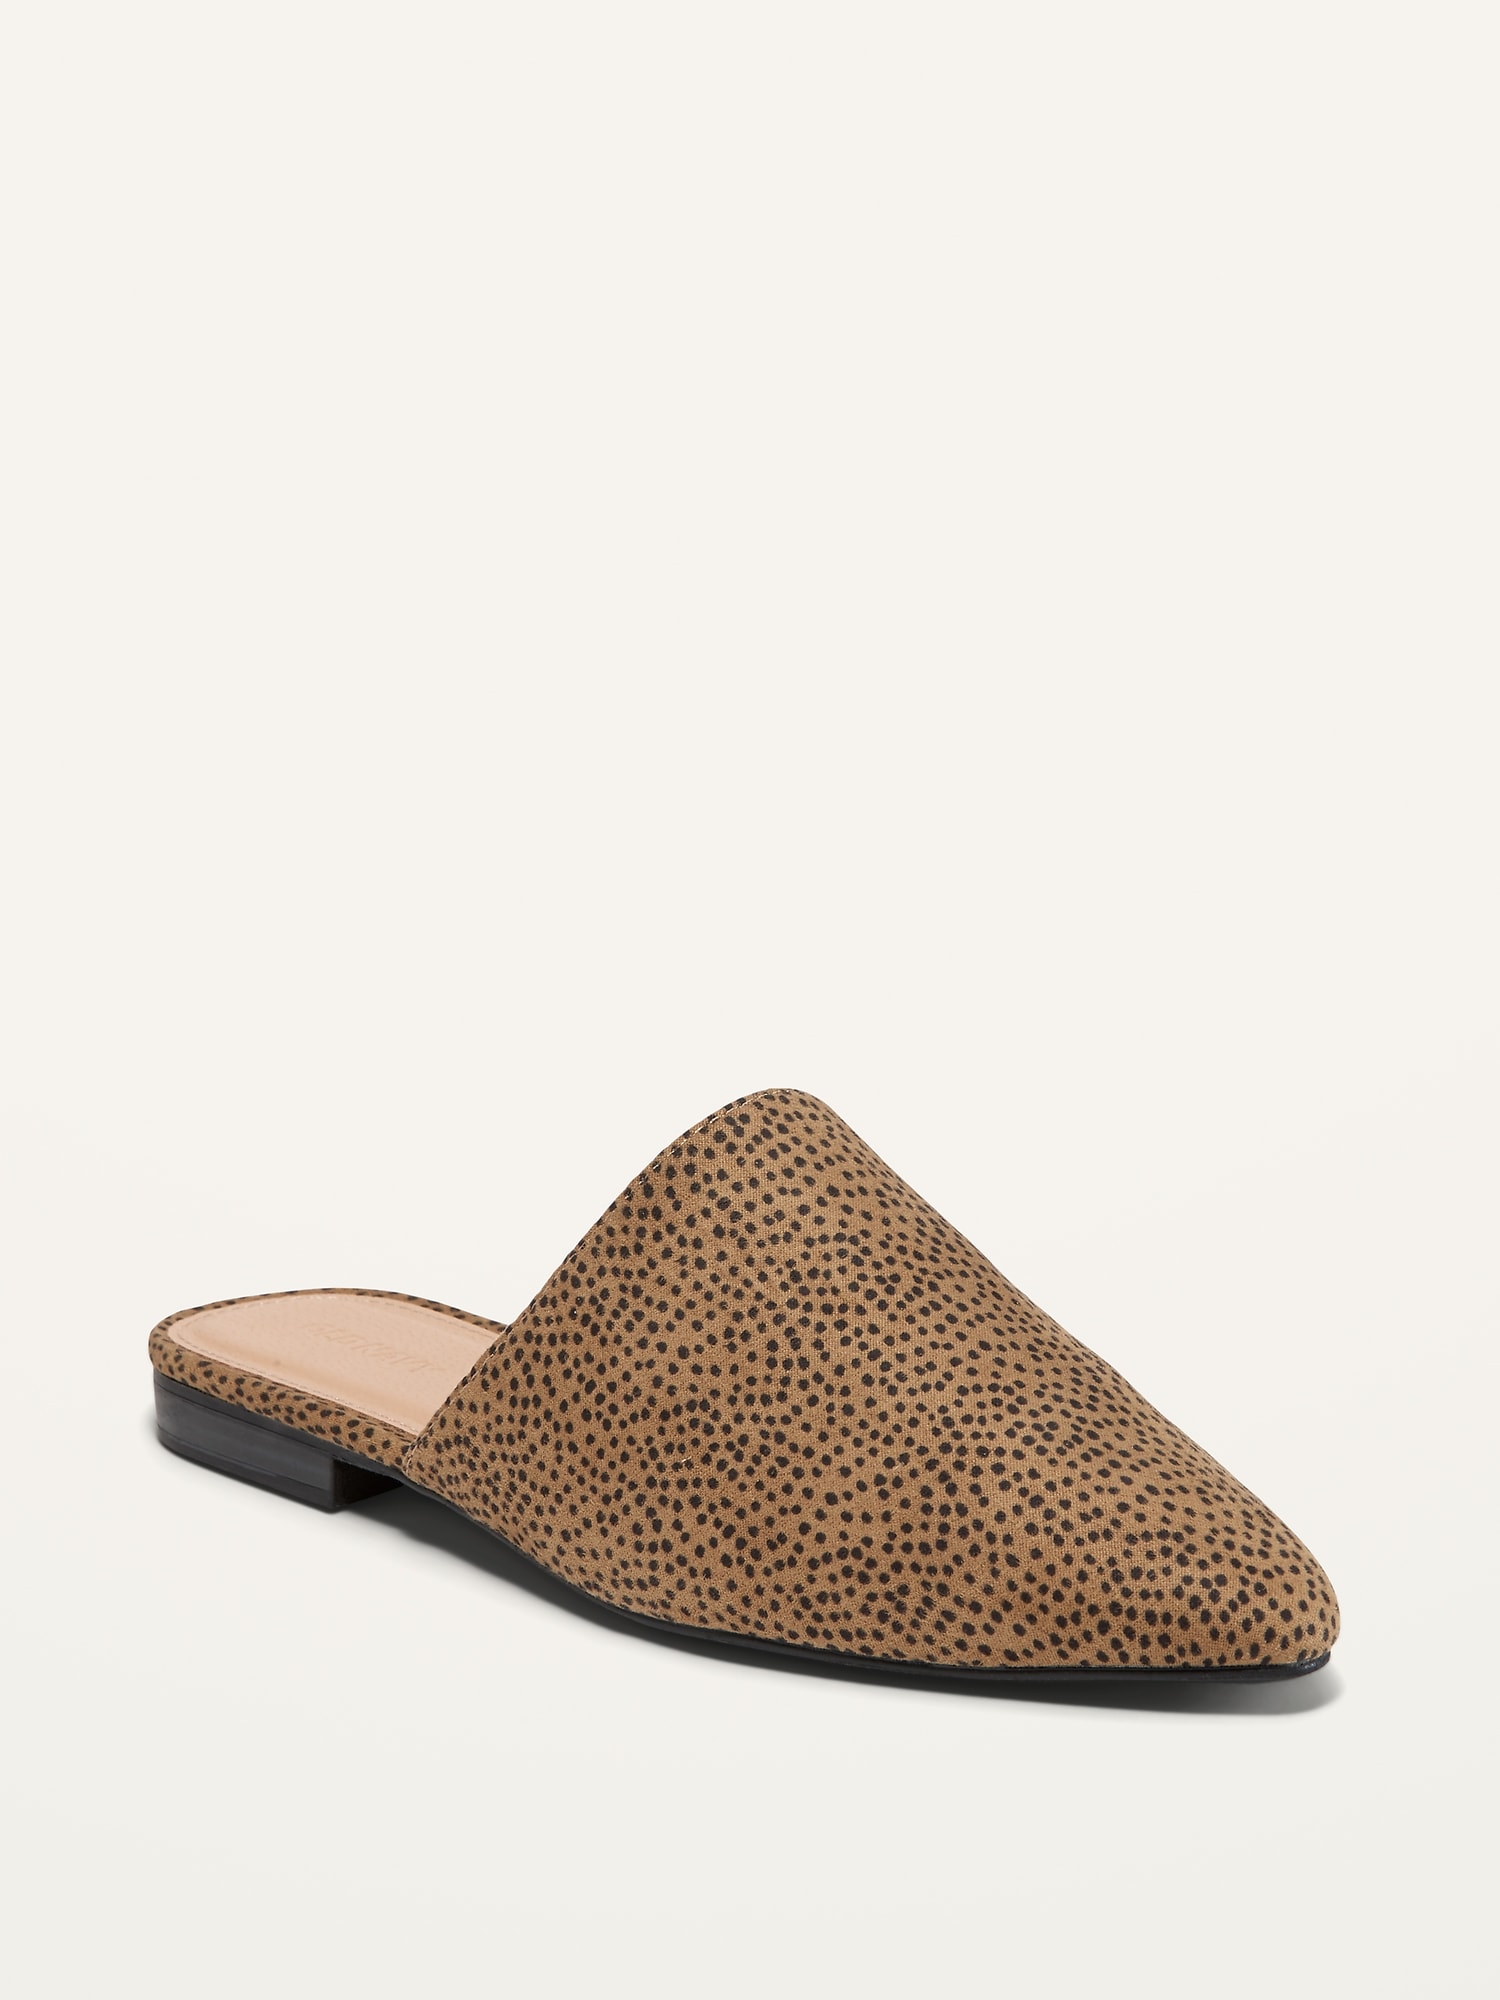 Faux-Suede Pointy-Toe Mule Flats For Women | Old Navy